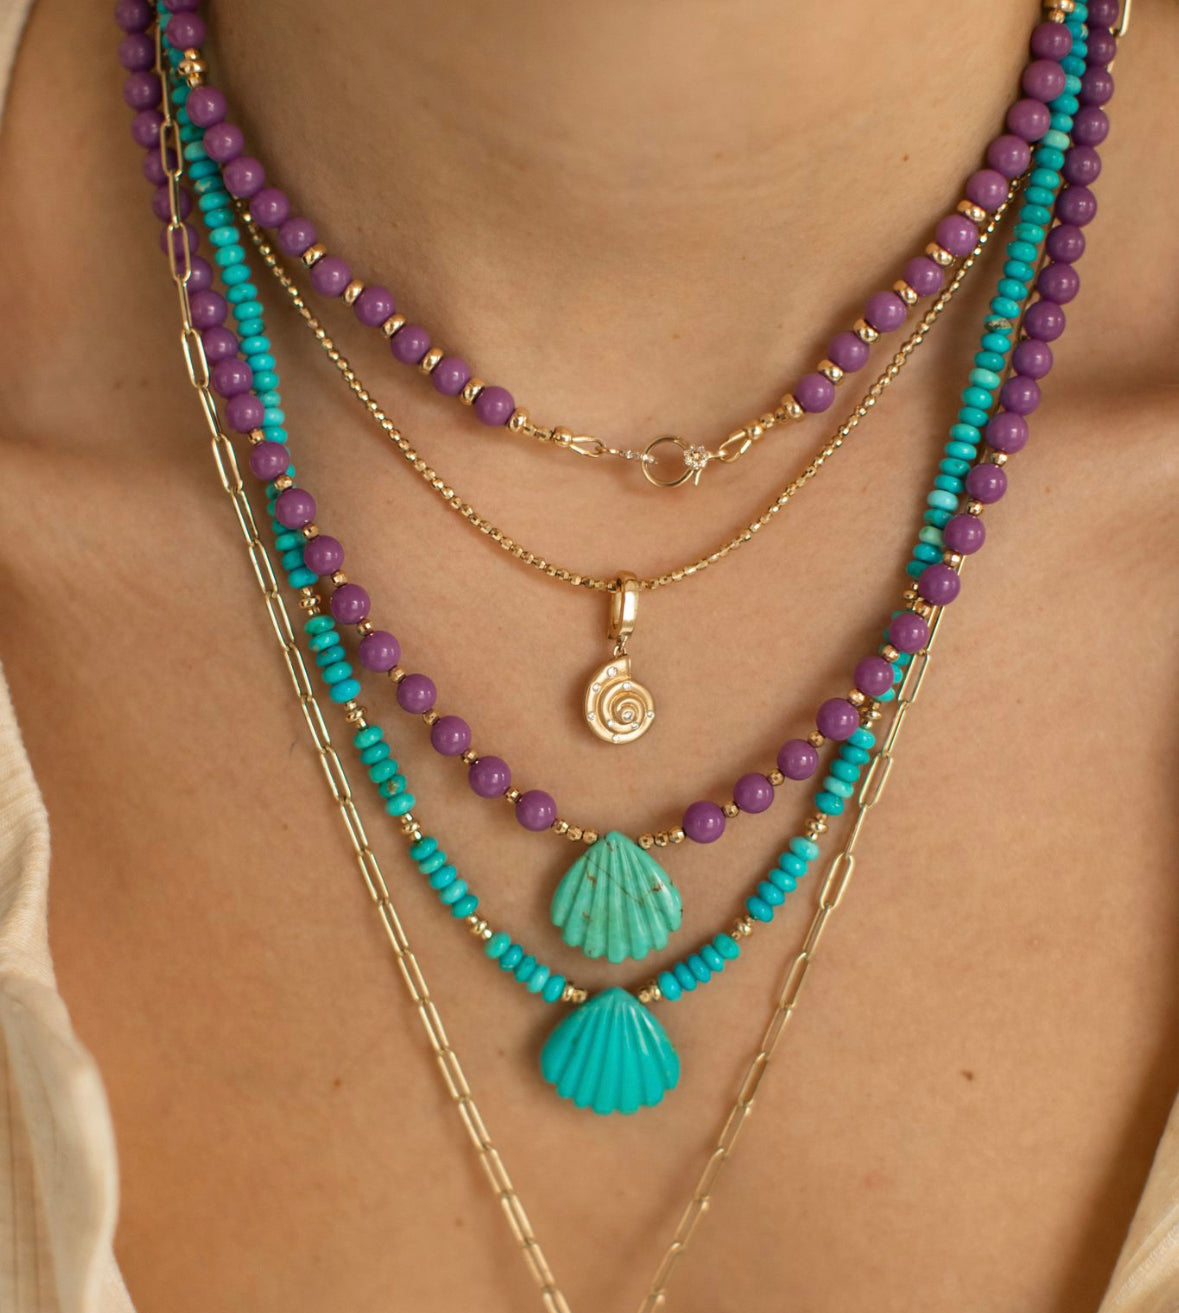 PURPLE GEMSTONE NECKLACE WITH TURQUOISE CARVED SHELL